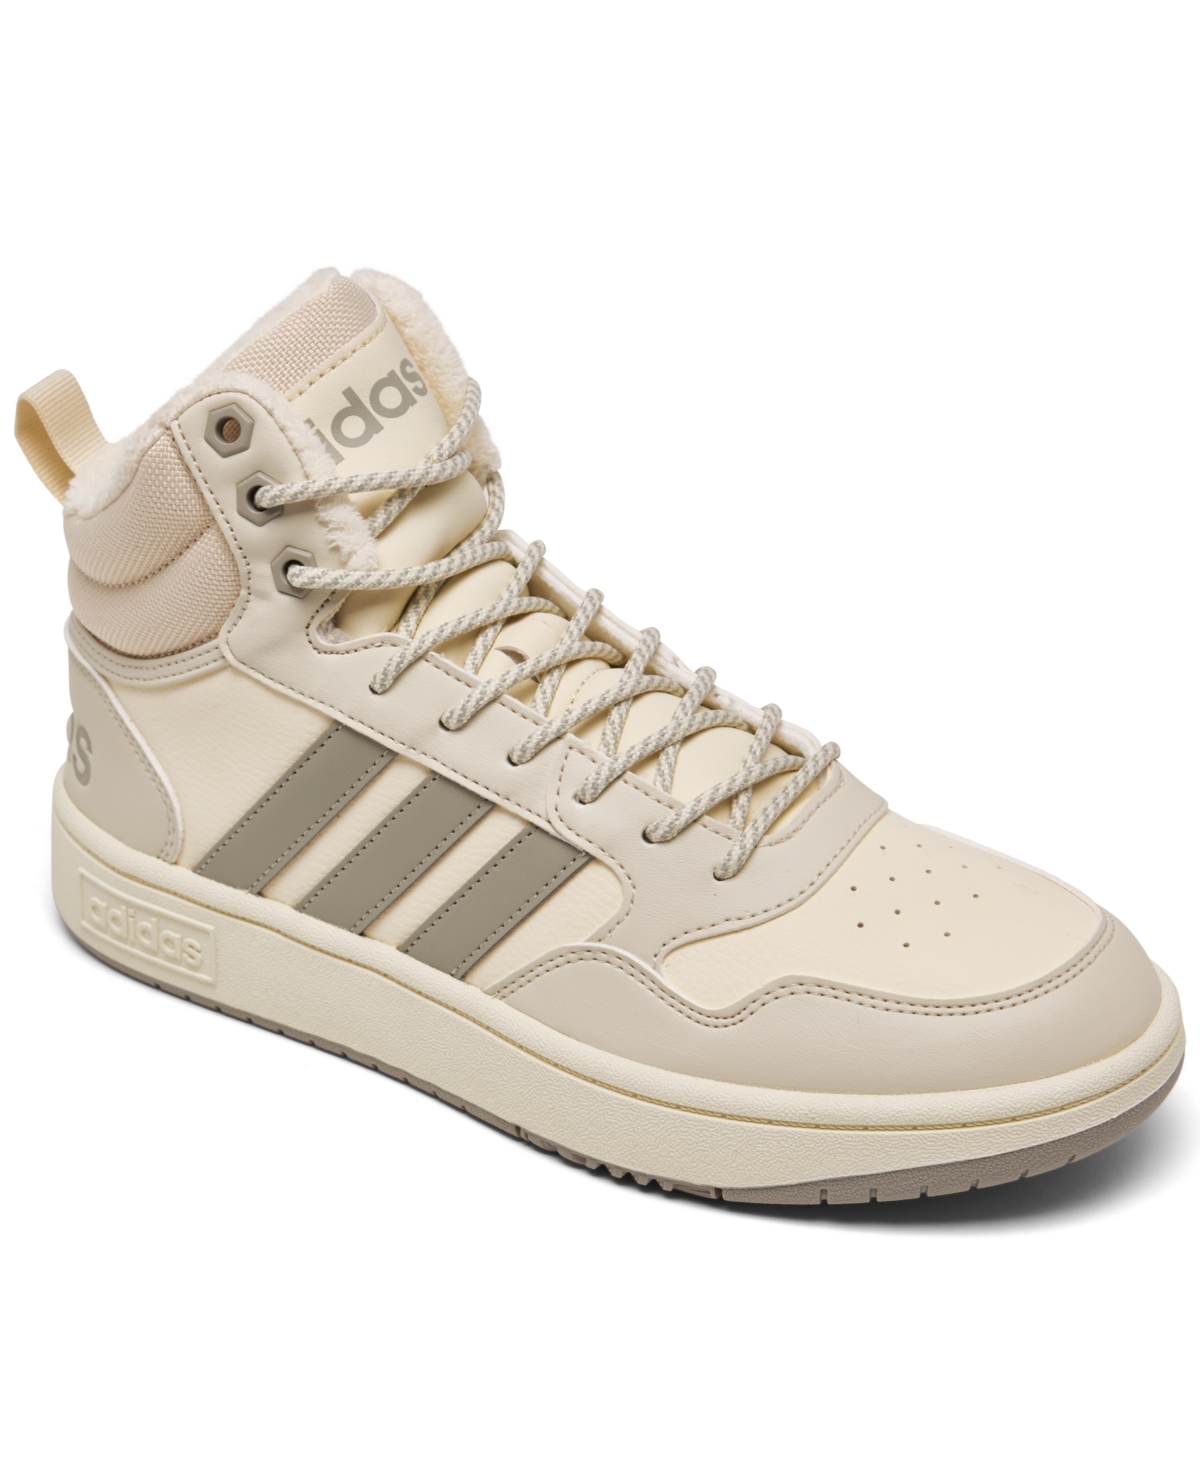 Adidas Originals Women's Essentials Hoops 3.0 Mid Winterized Sneakerboots From Finish Line In Wonder White,aluminum